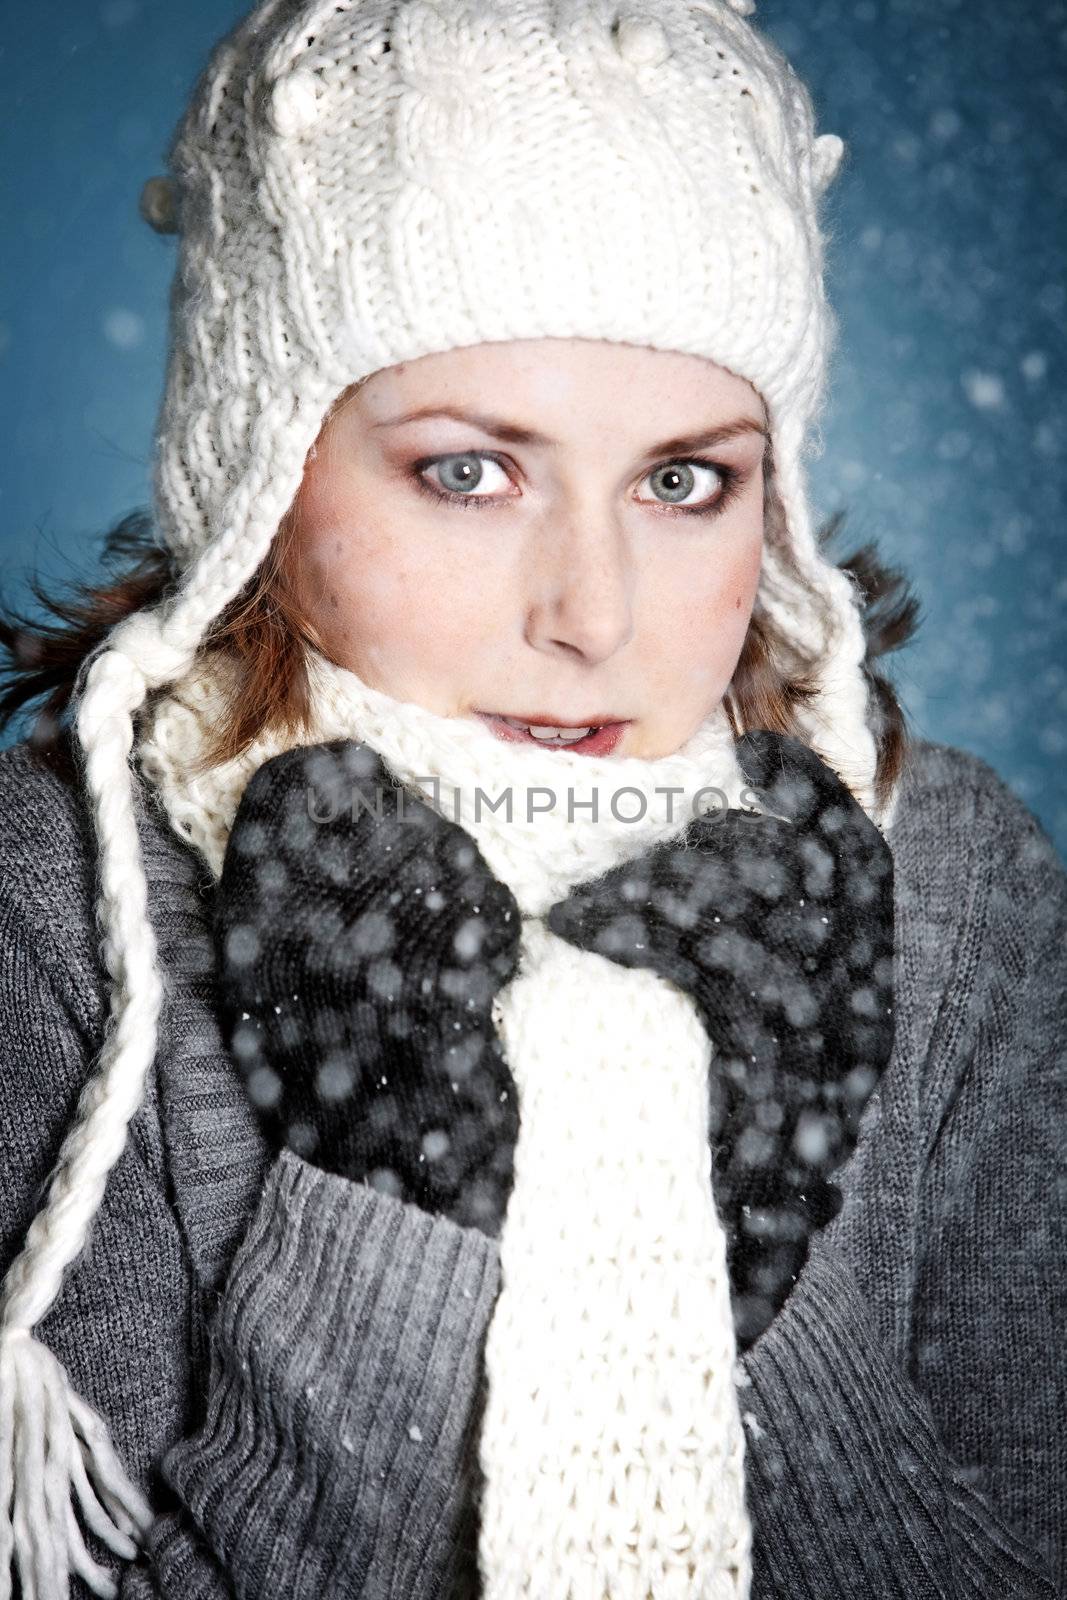 Beautiful girl with warm winterclothes in the snow